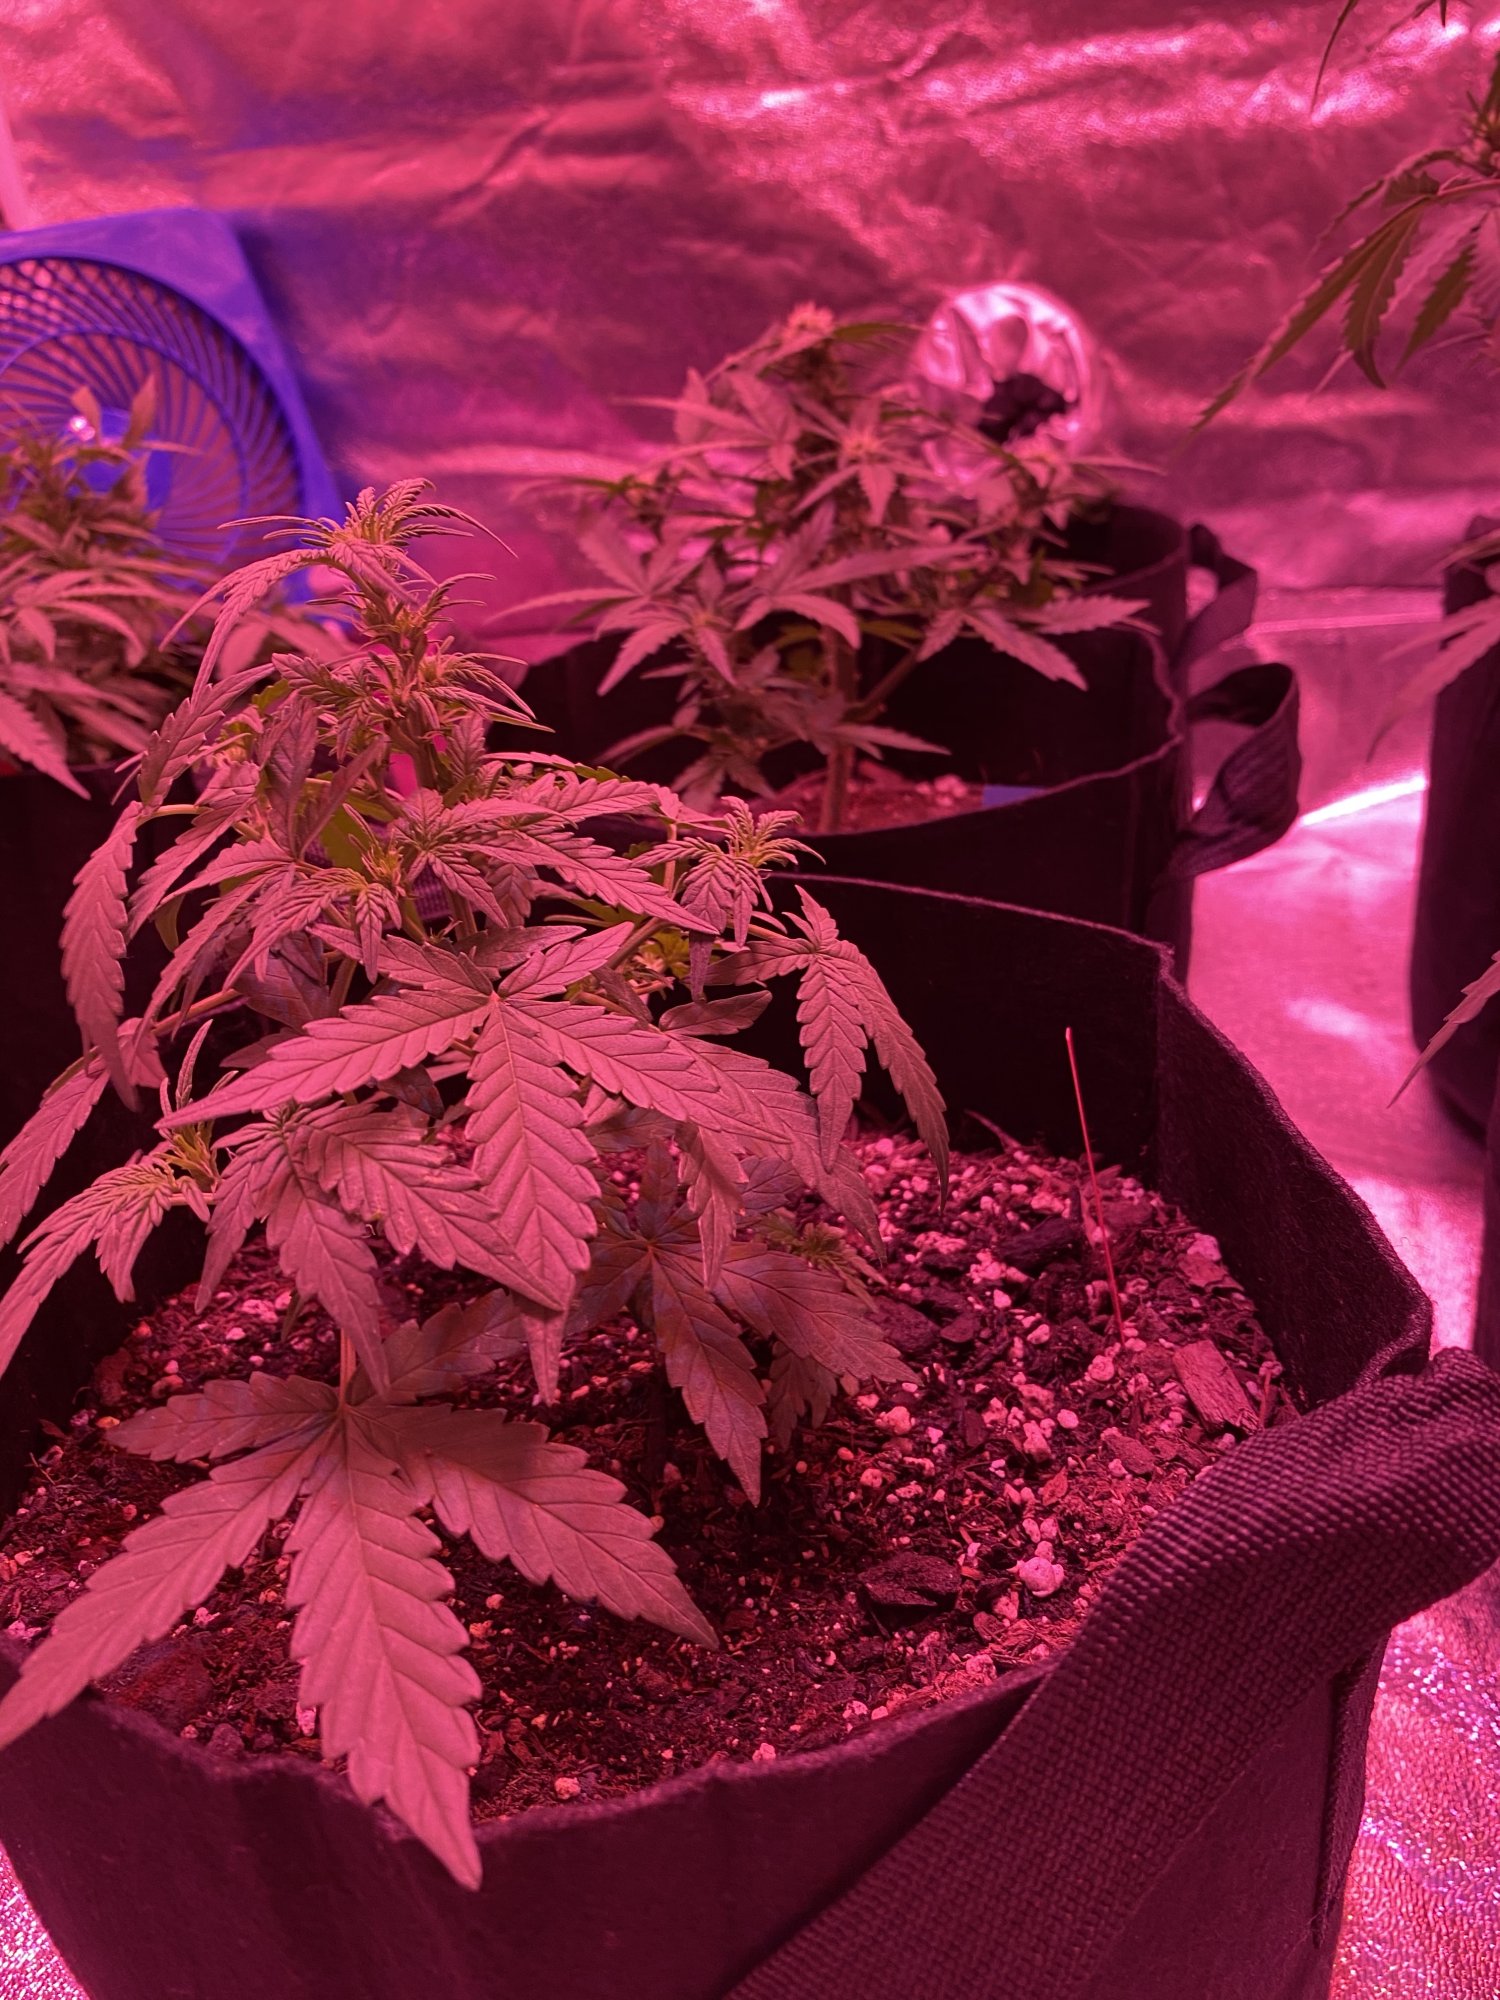 New to the growing world and need some advice 2